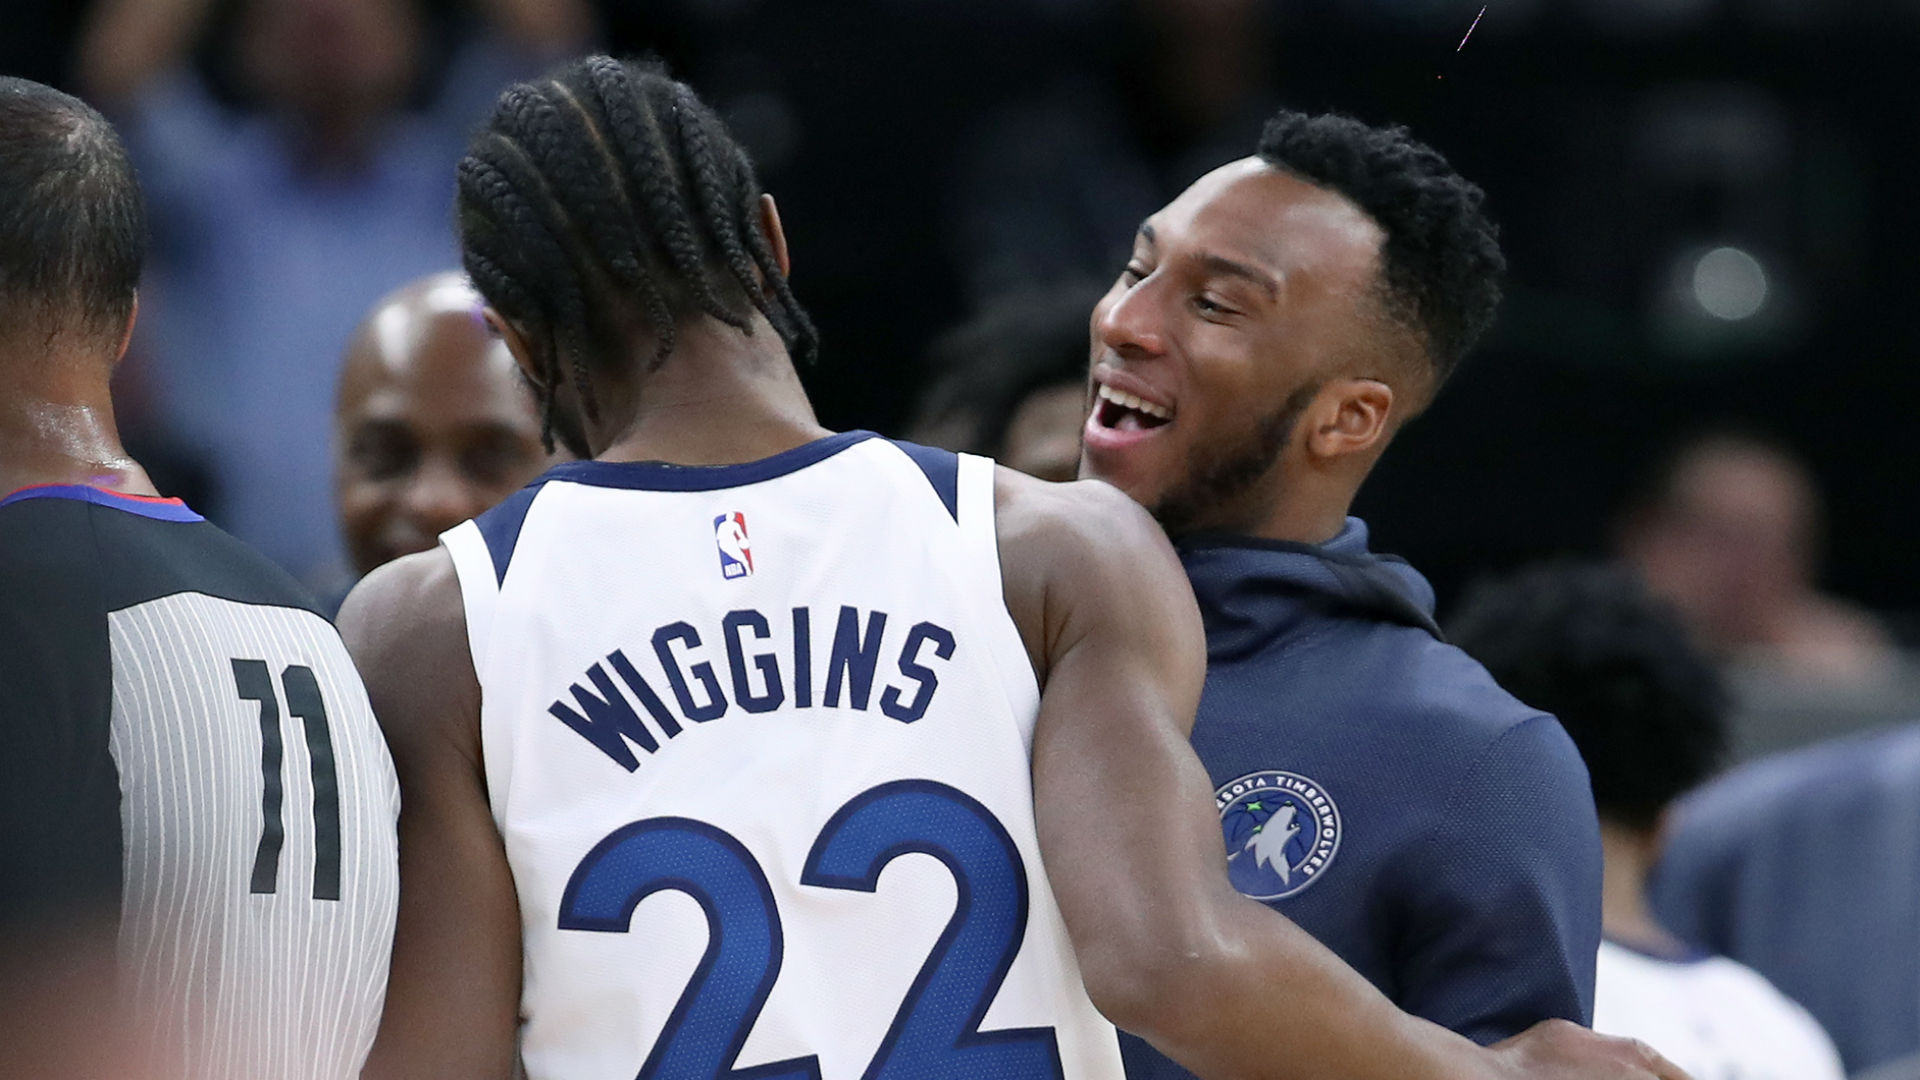 Canadian moment of the week: Andrew Wiggins rises up for a big putback dunk | NBA.com ...